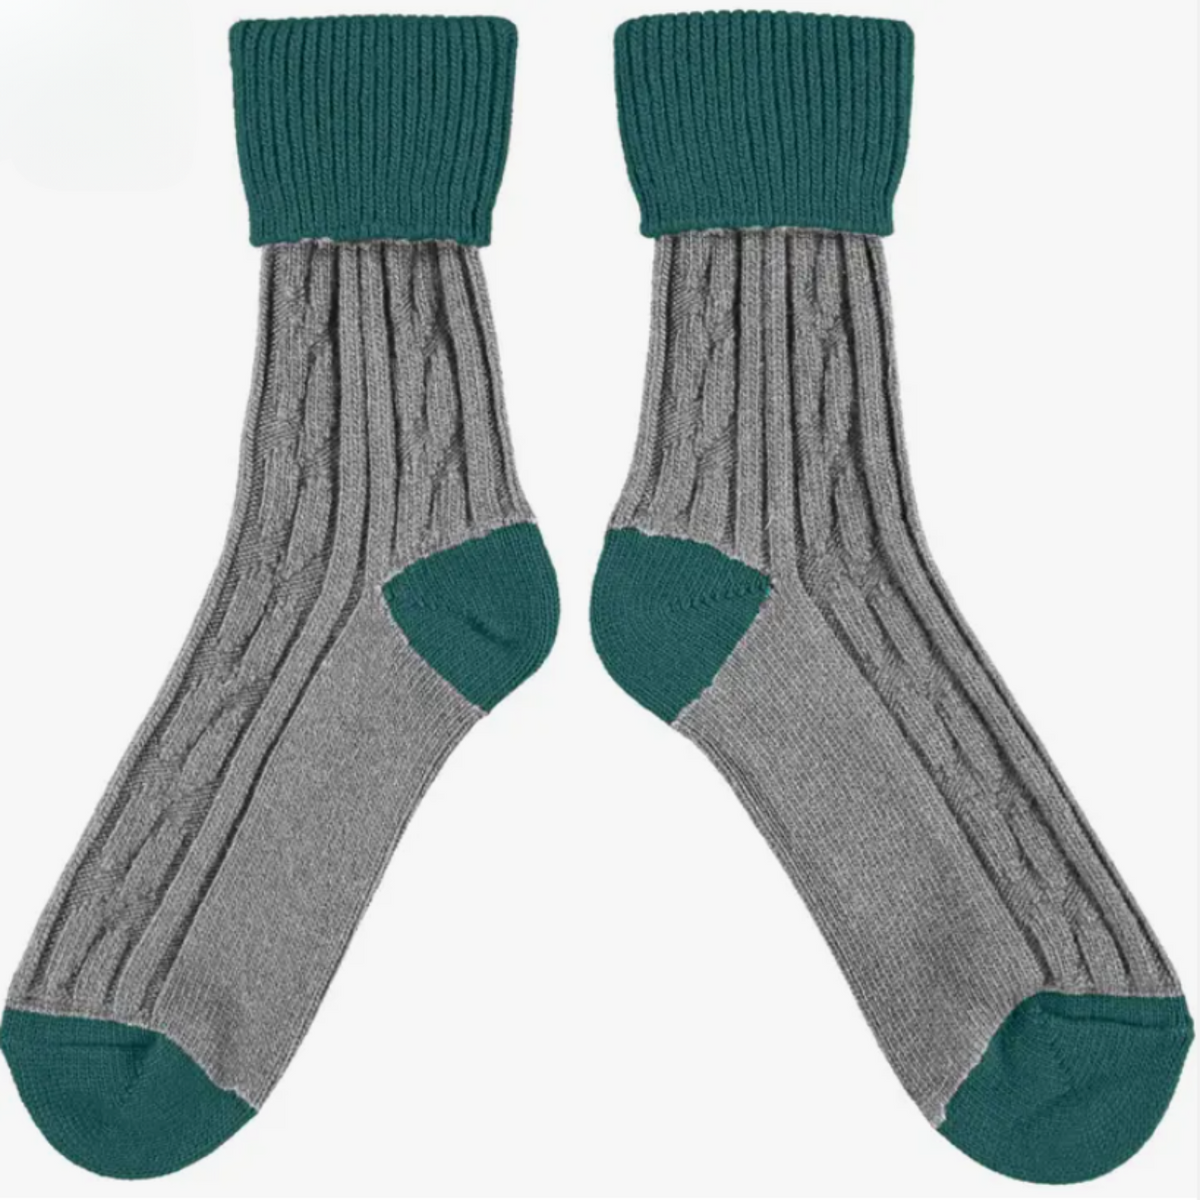 Catherine Tough Slouch Cashmere Blend women&#39;s and men&#39;s crew socks featuring cable knit socks with teal colored cuff, heel and toes and gray colored body. Socks shown on display. 